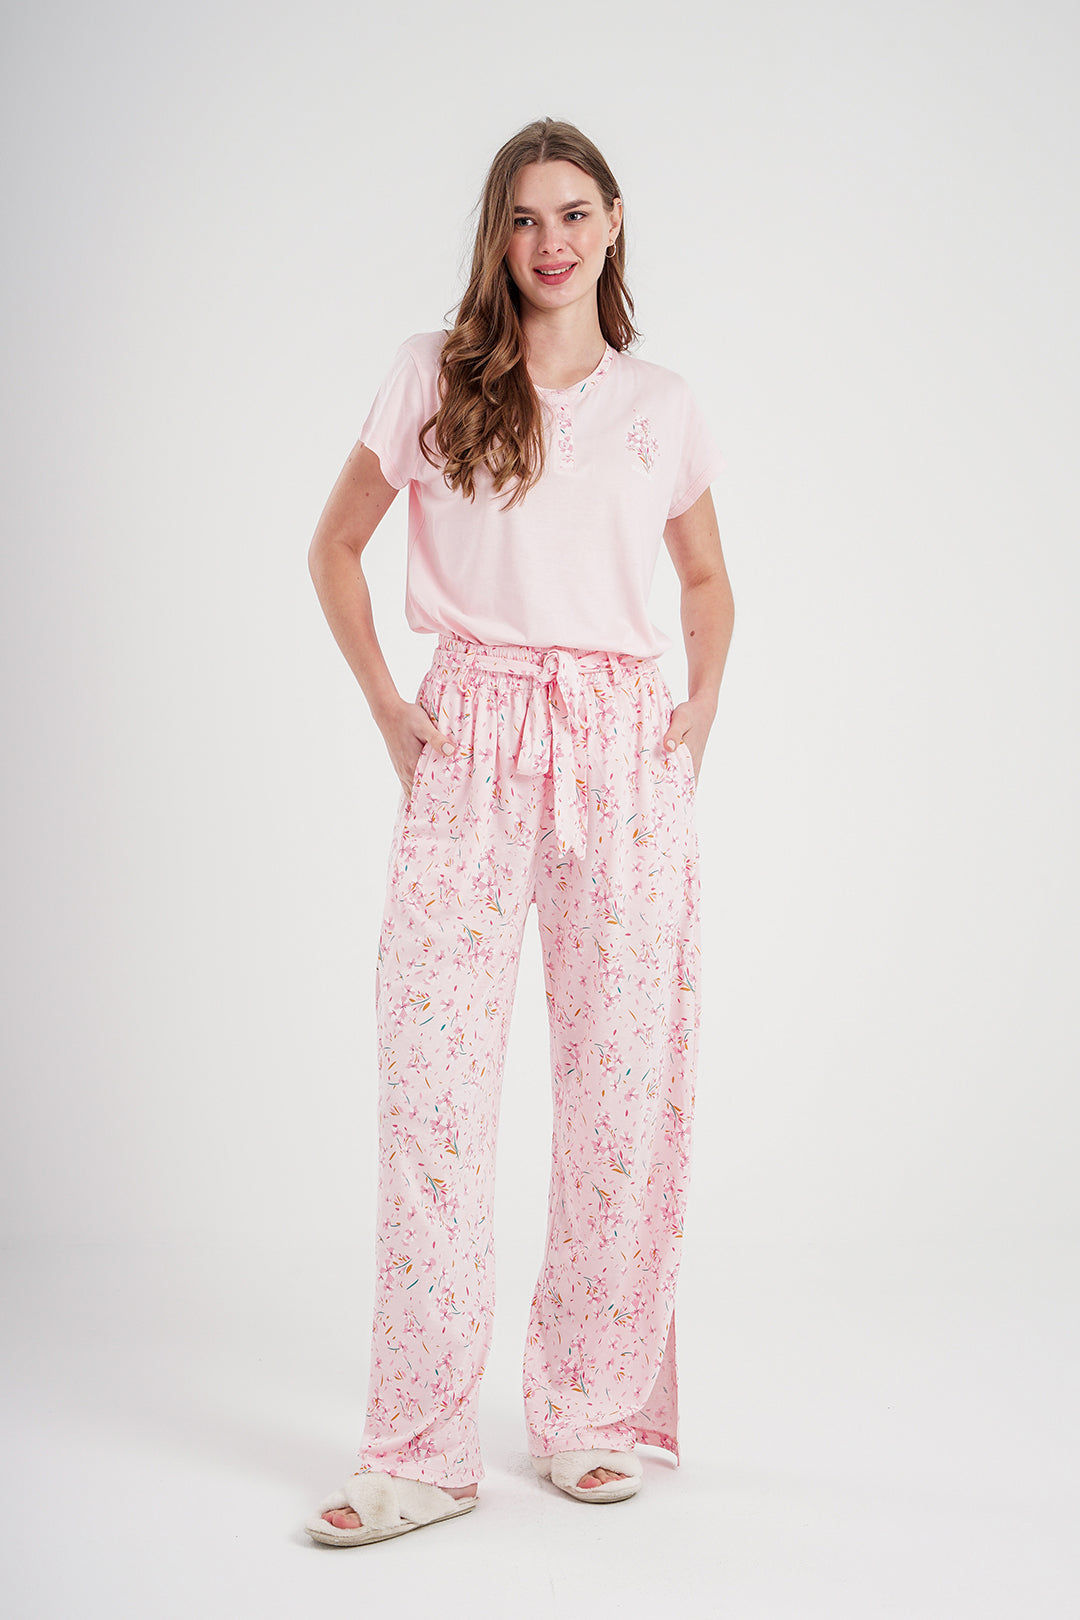 Women's pajamas with floral printed modal pants